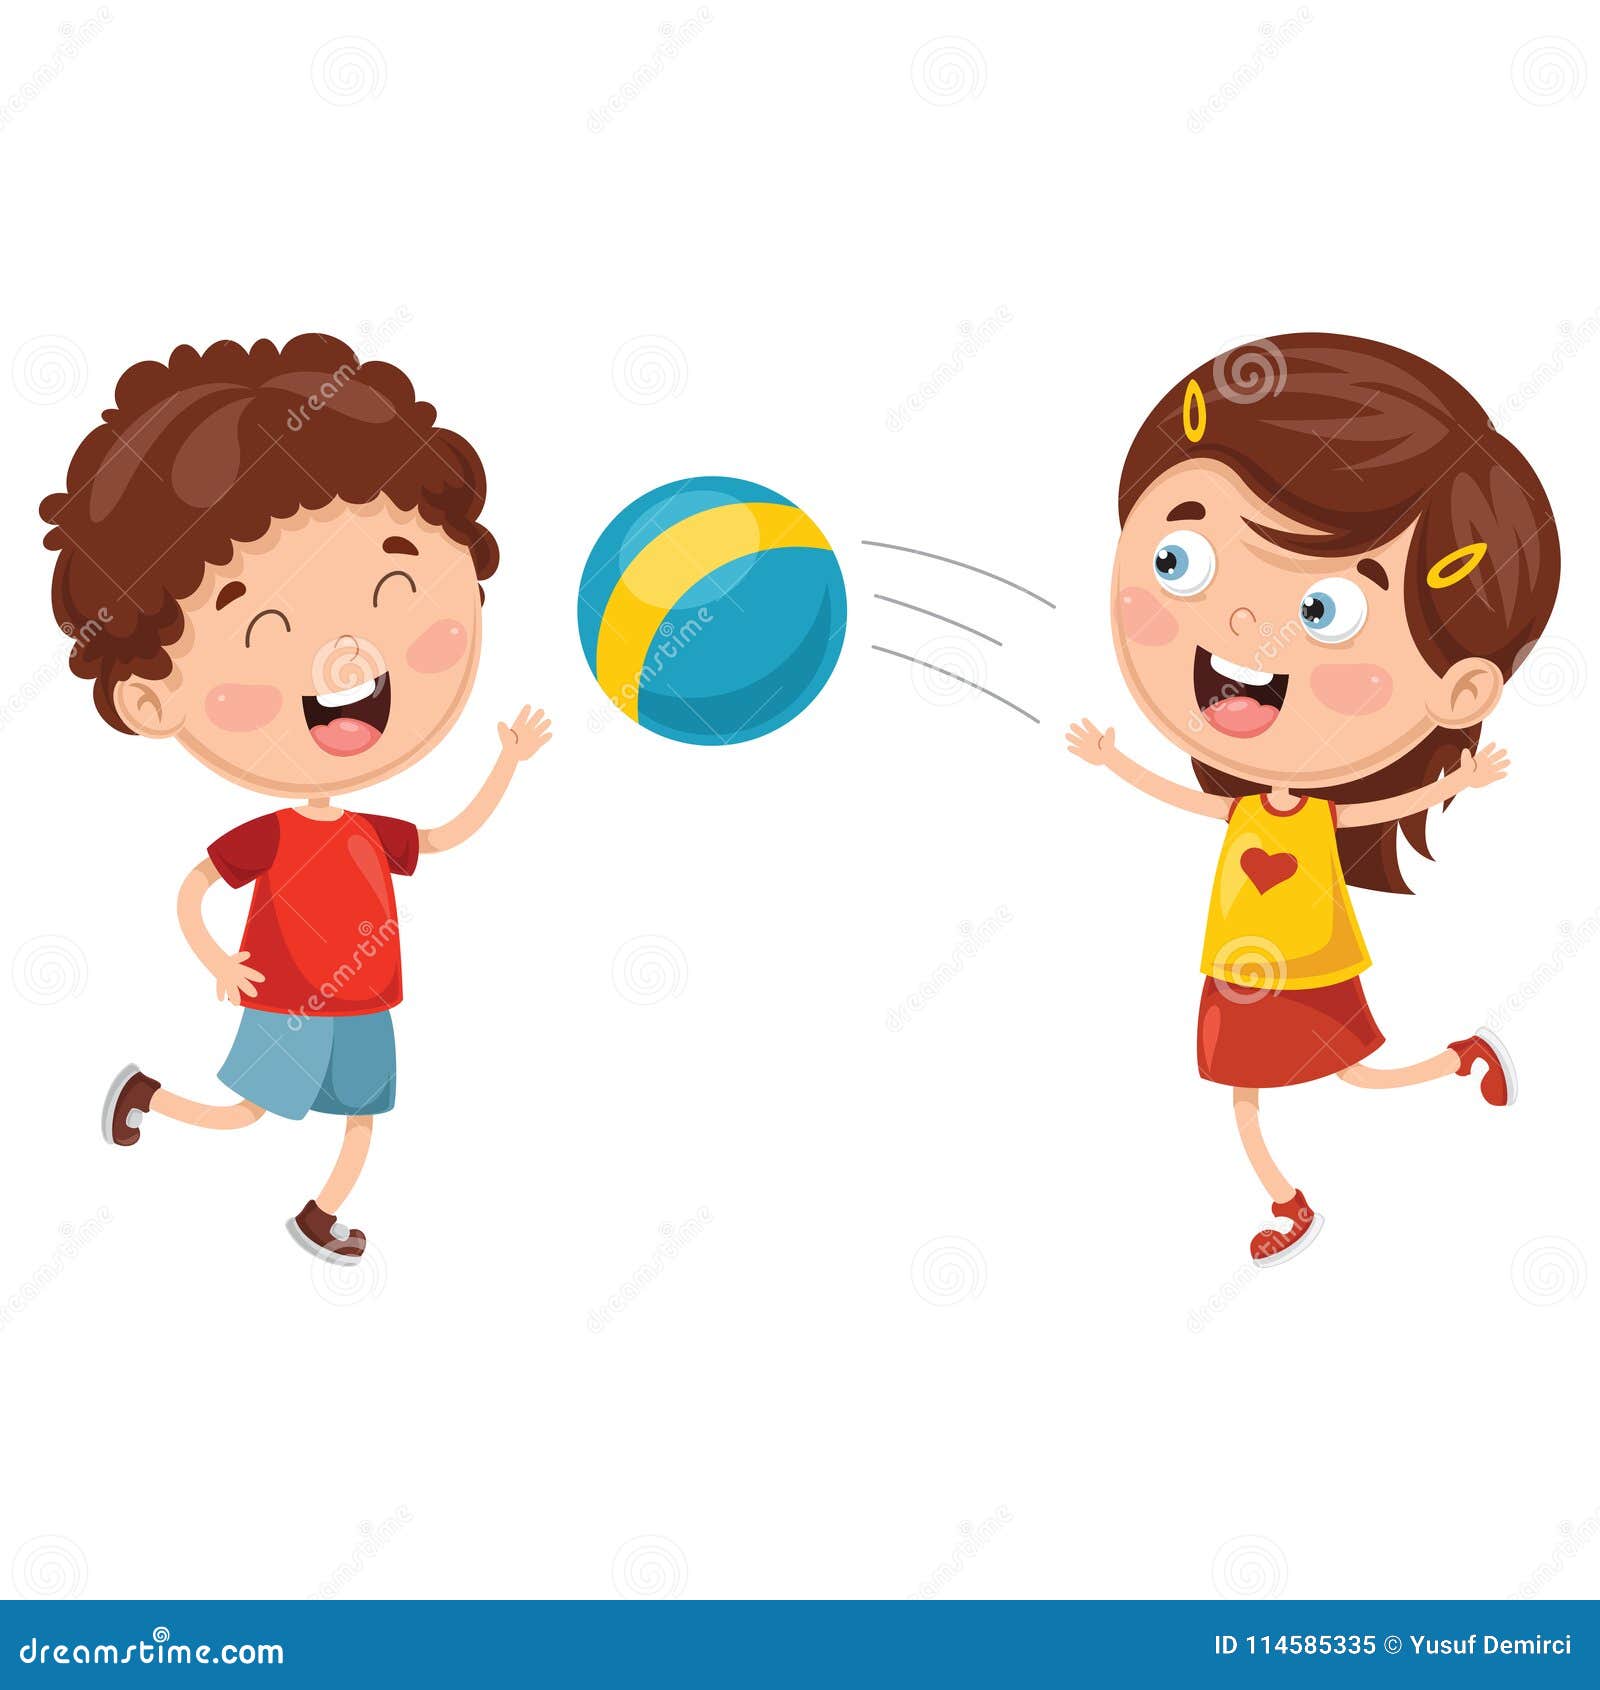 Children playing tag game cartoon art Royalty Free Vector